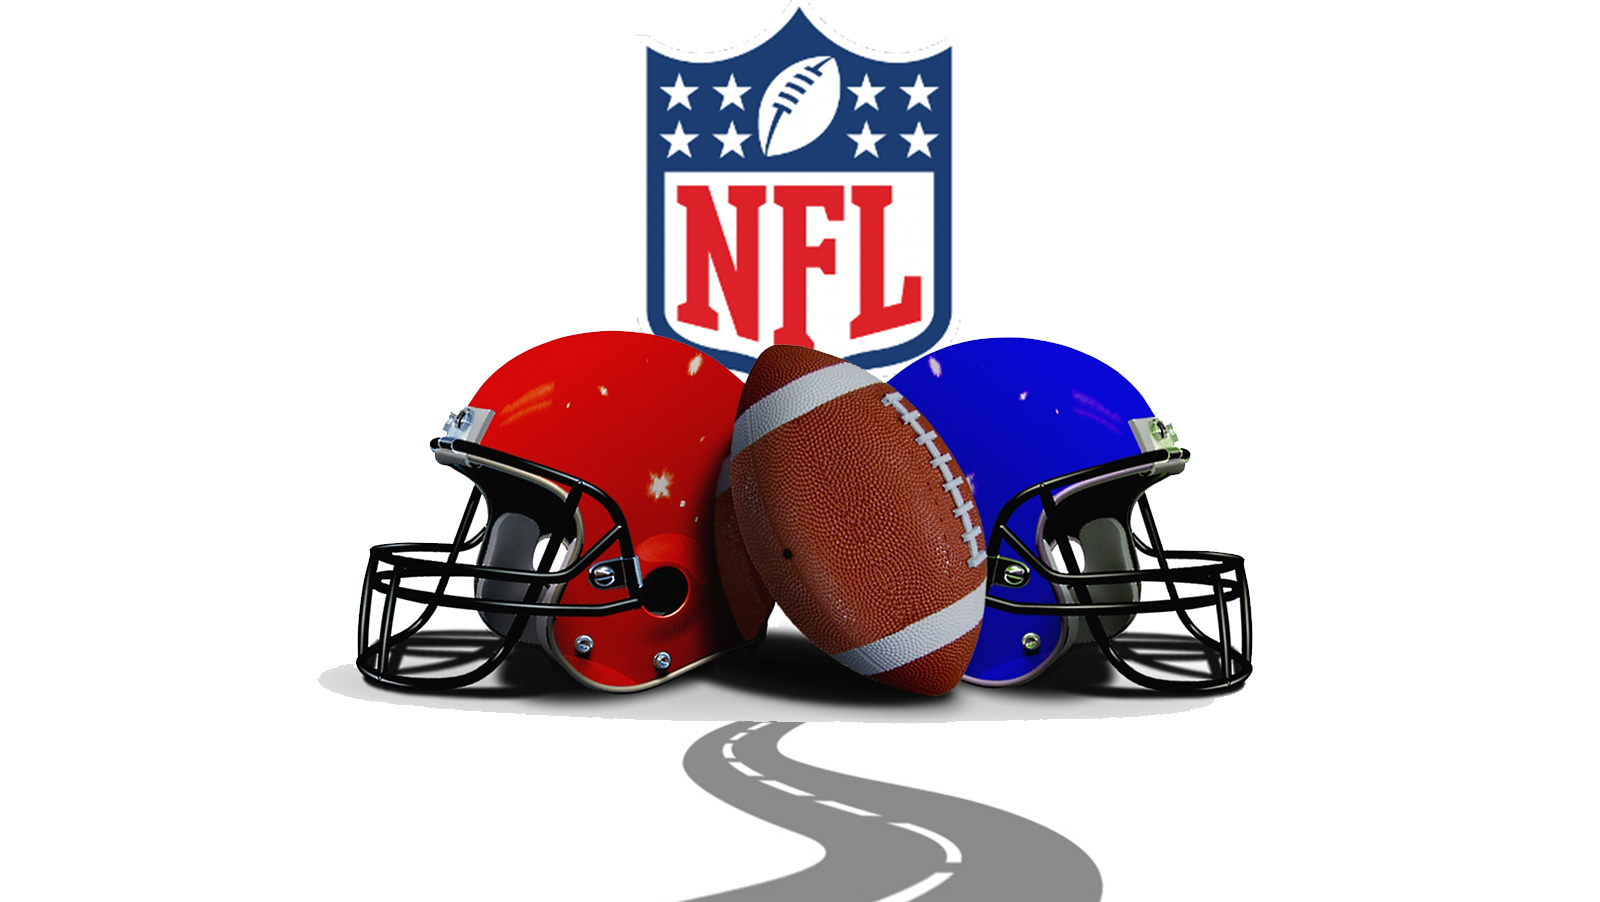 Road Teams Coming off 4-0 ATS Mark Heading into Divisional Round